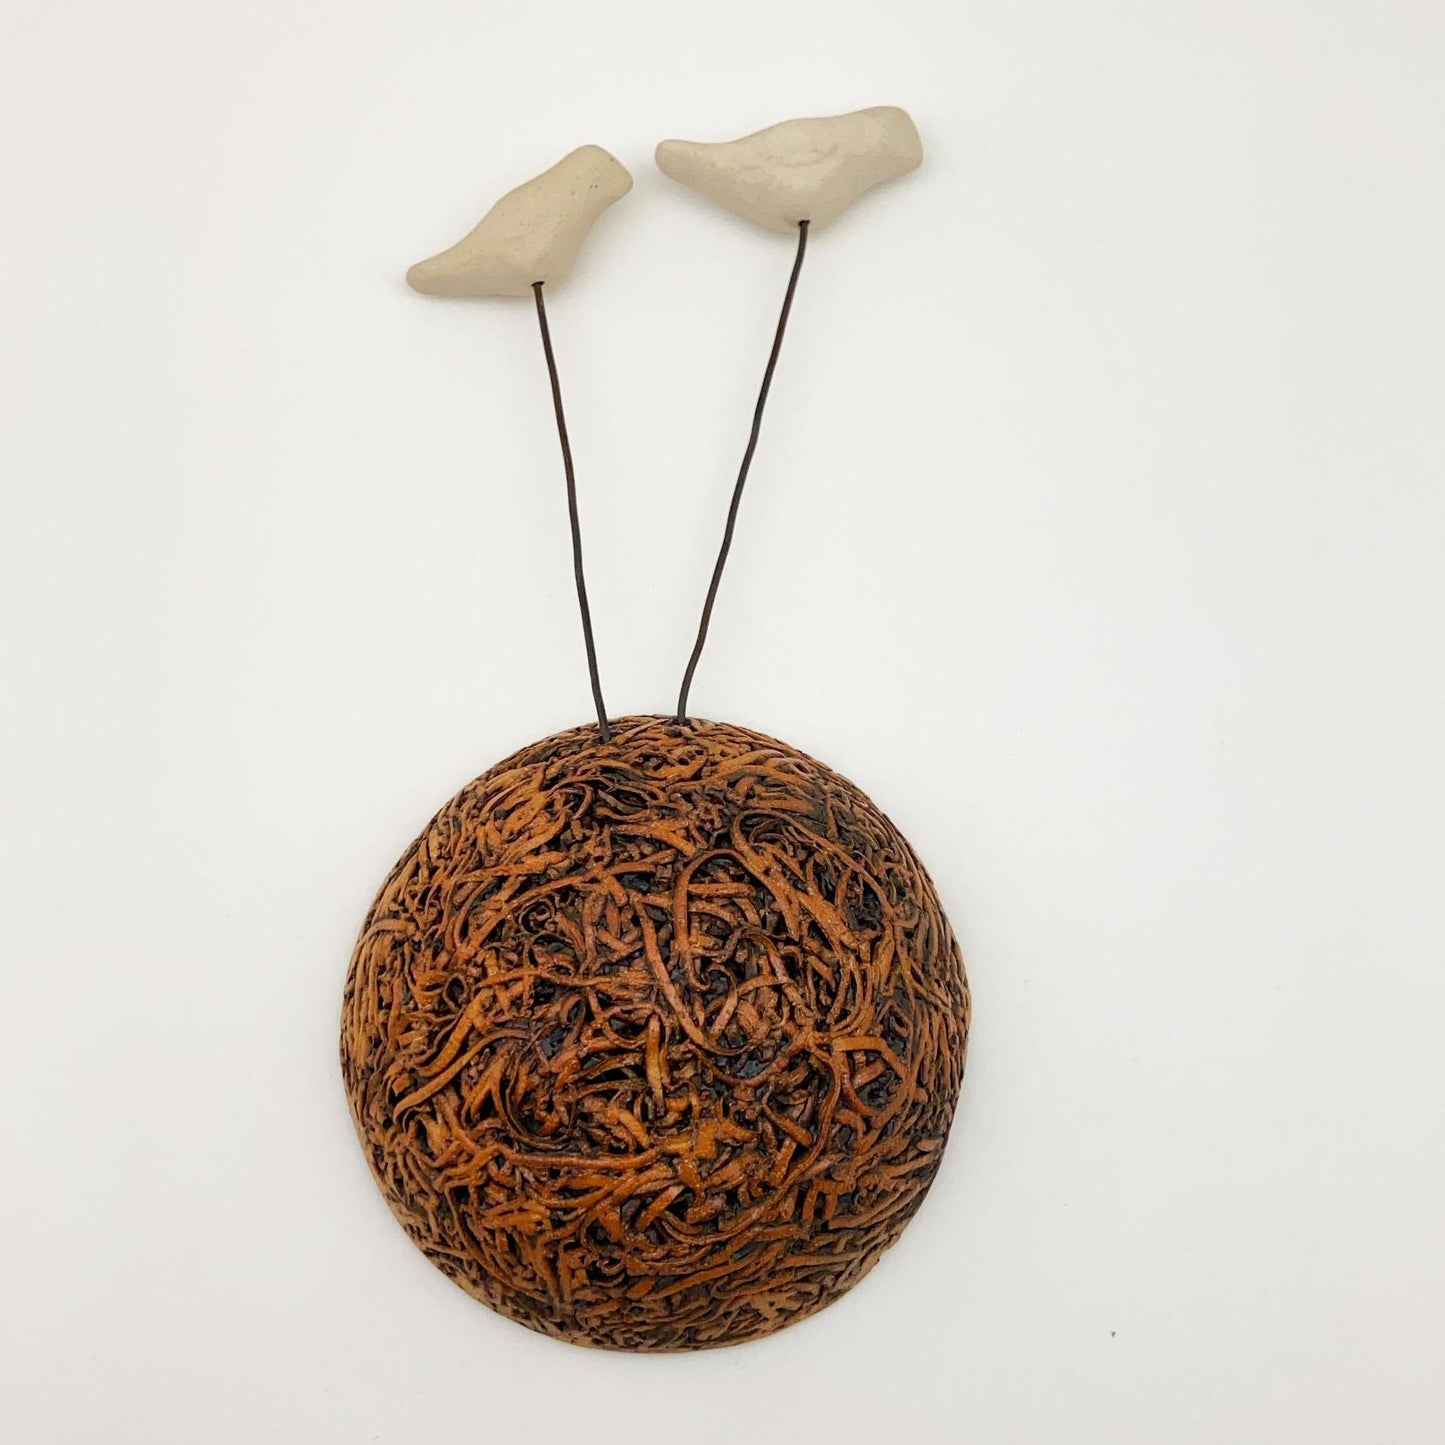 Sculpture - Wall Nest with Birds - Ceramic with Metal